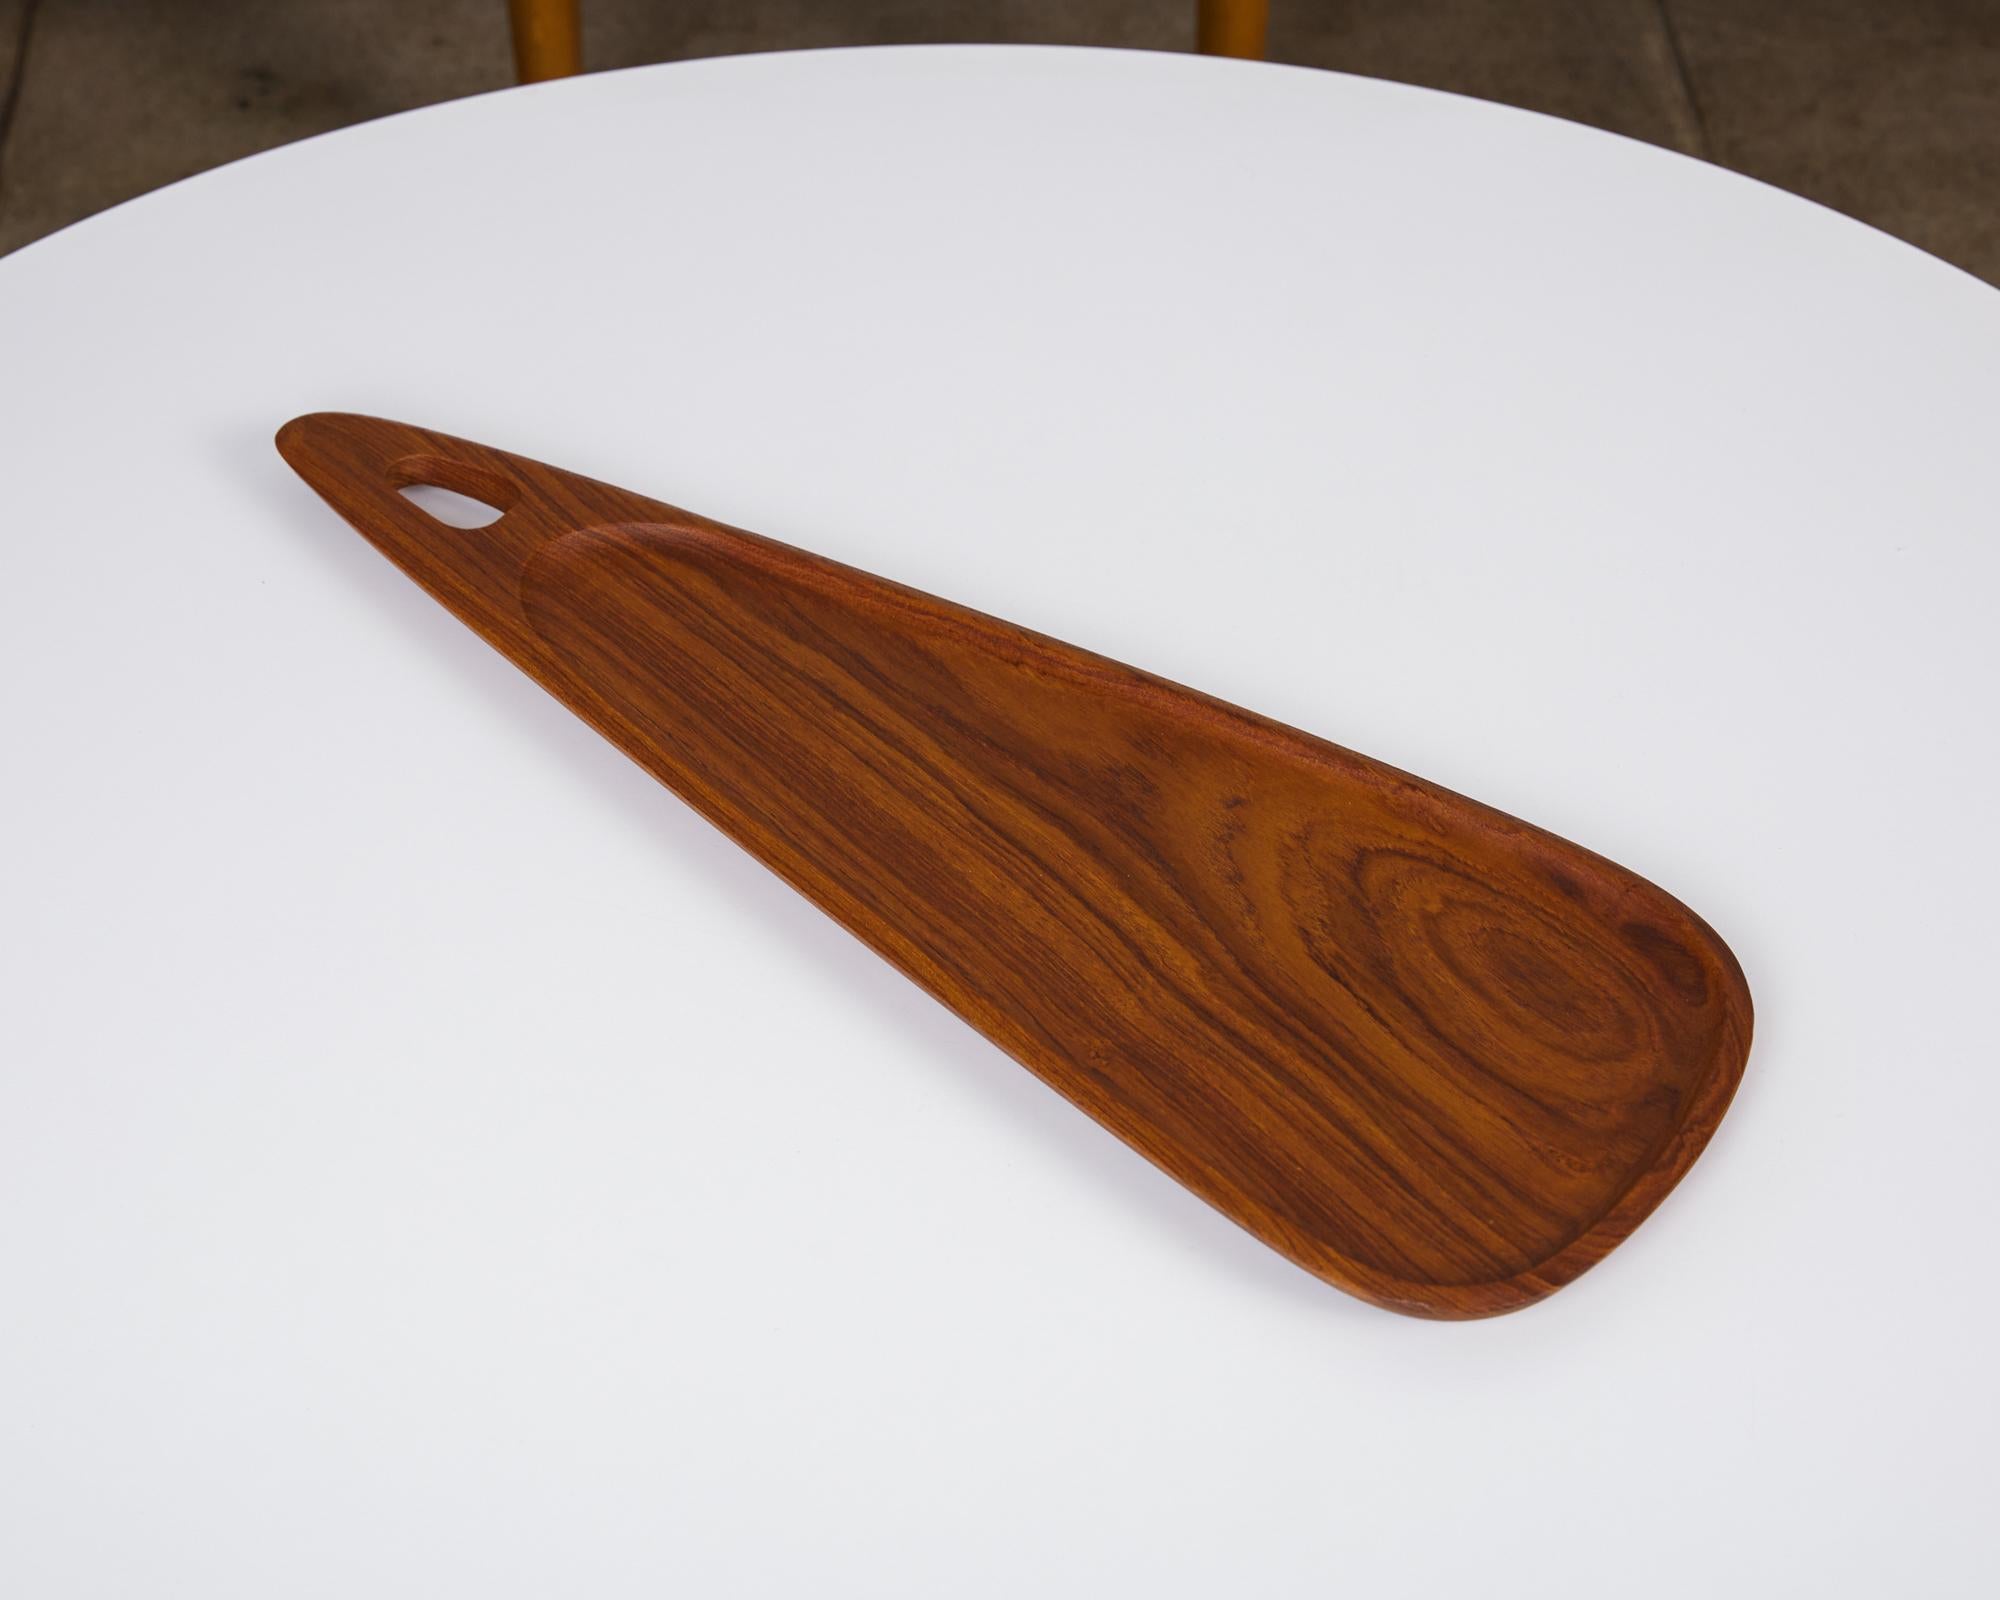 Asymmetrical teak serving tray by SS Design, circa 1960s. A beautifully grained solid teak asymmetrical serving or display tray. The tray has a gentle recess, almost the size of the entire piece, that leaves a slim but sturdy edging detail. The